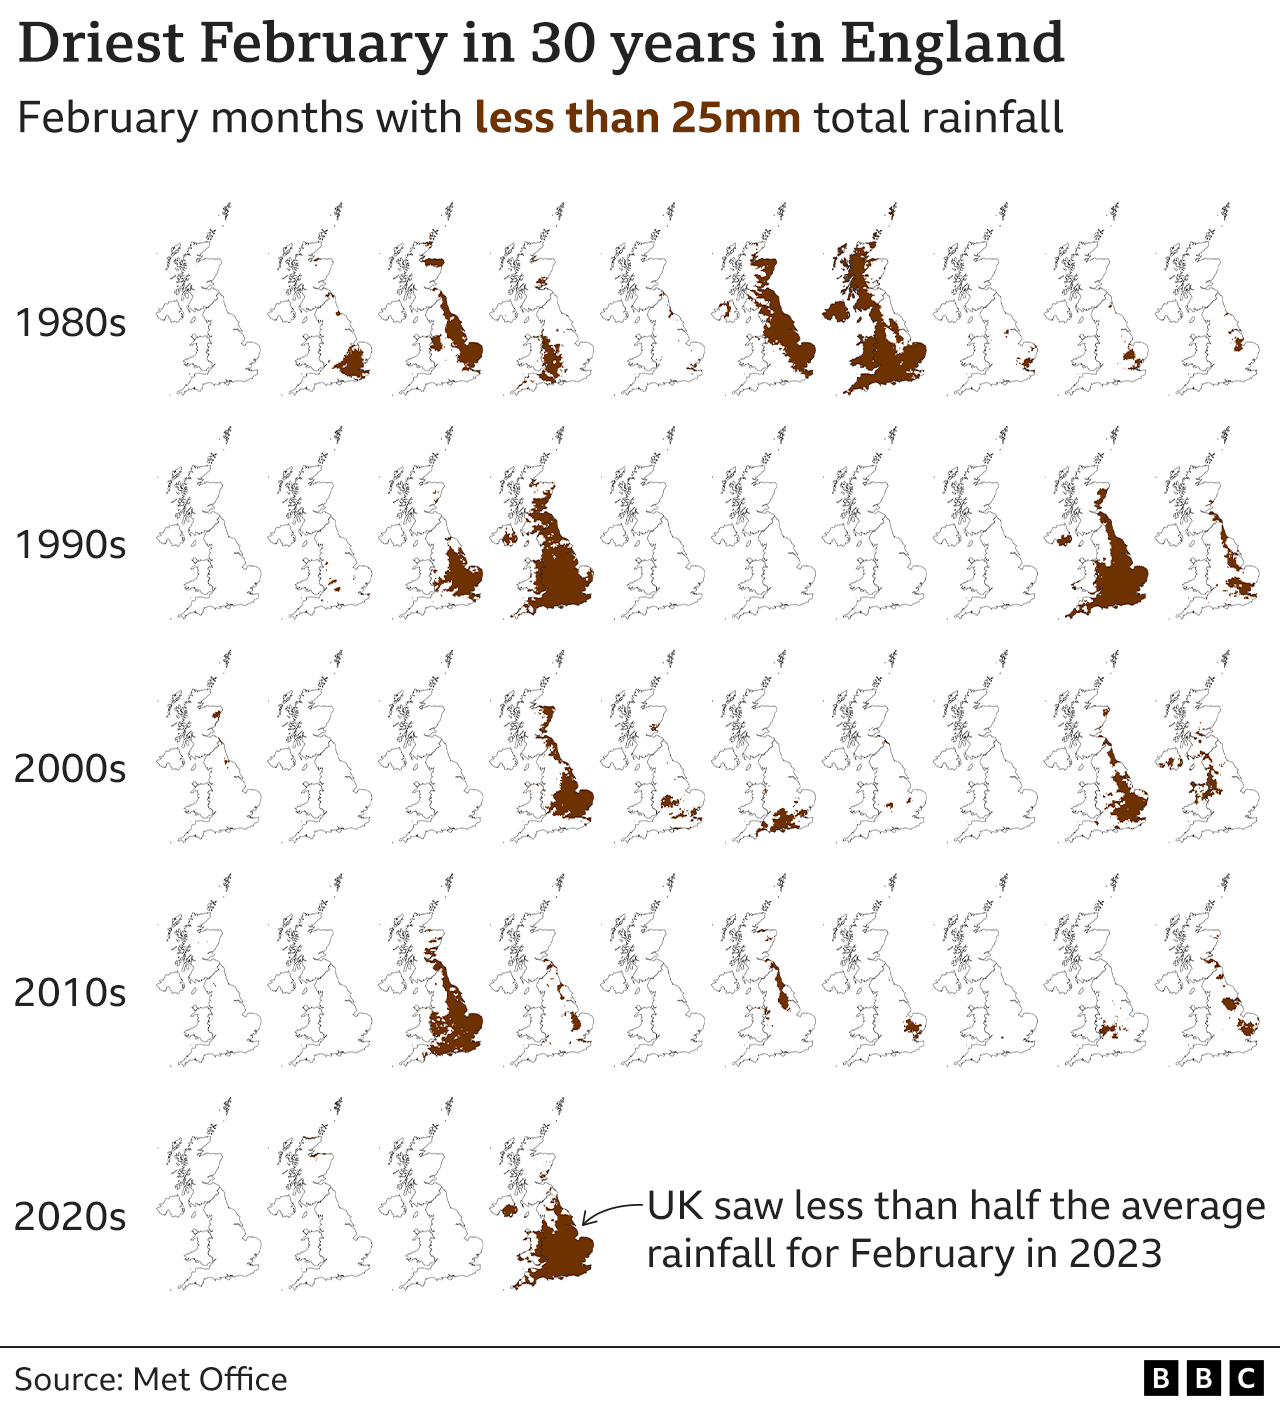 England had its driest February in 30 years